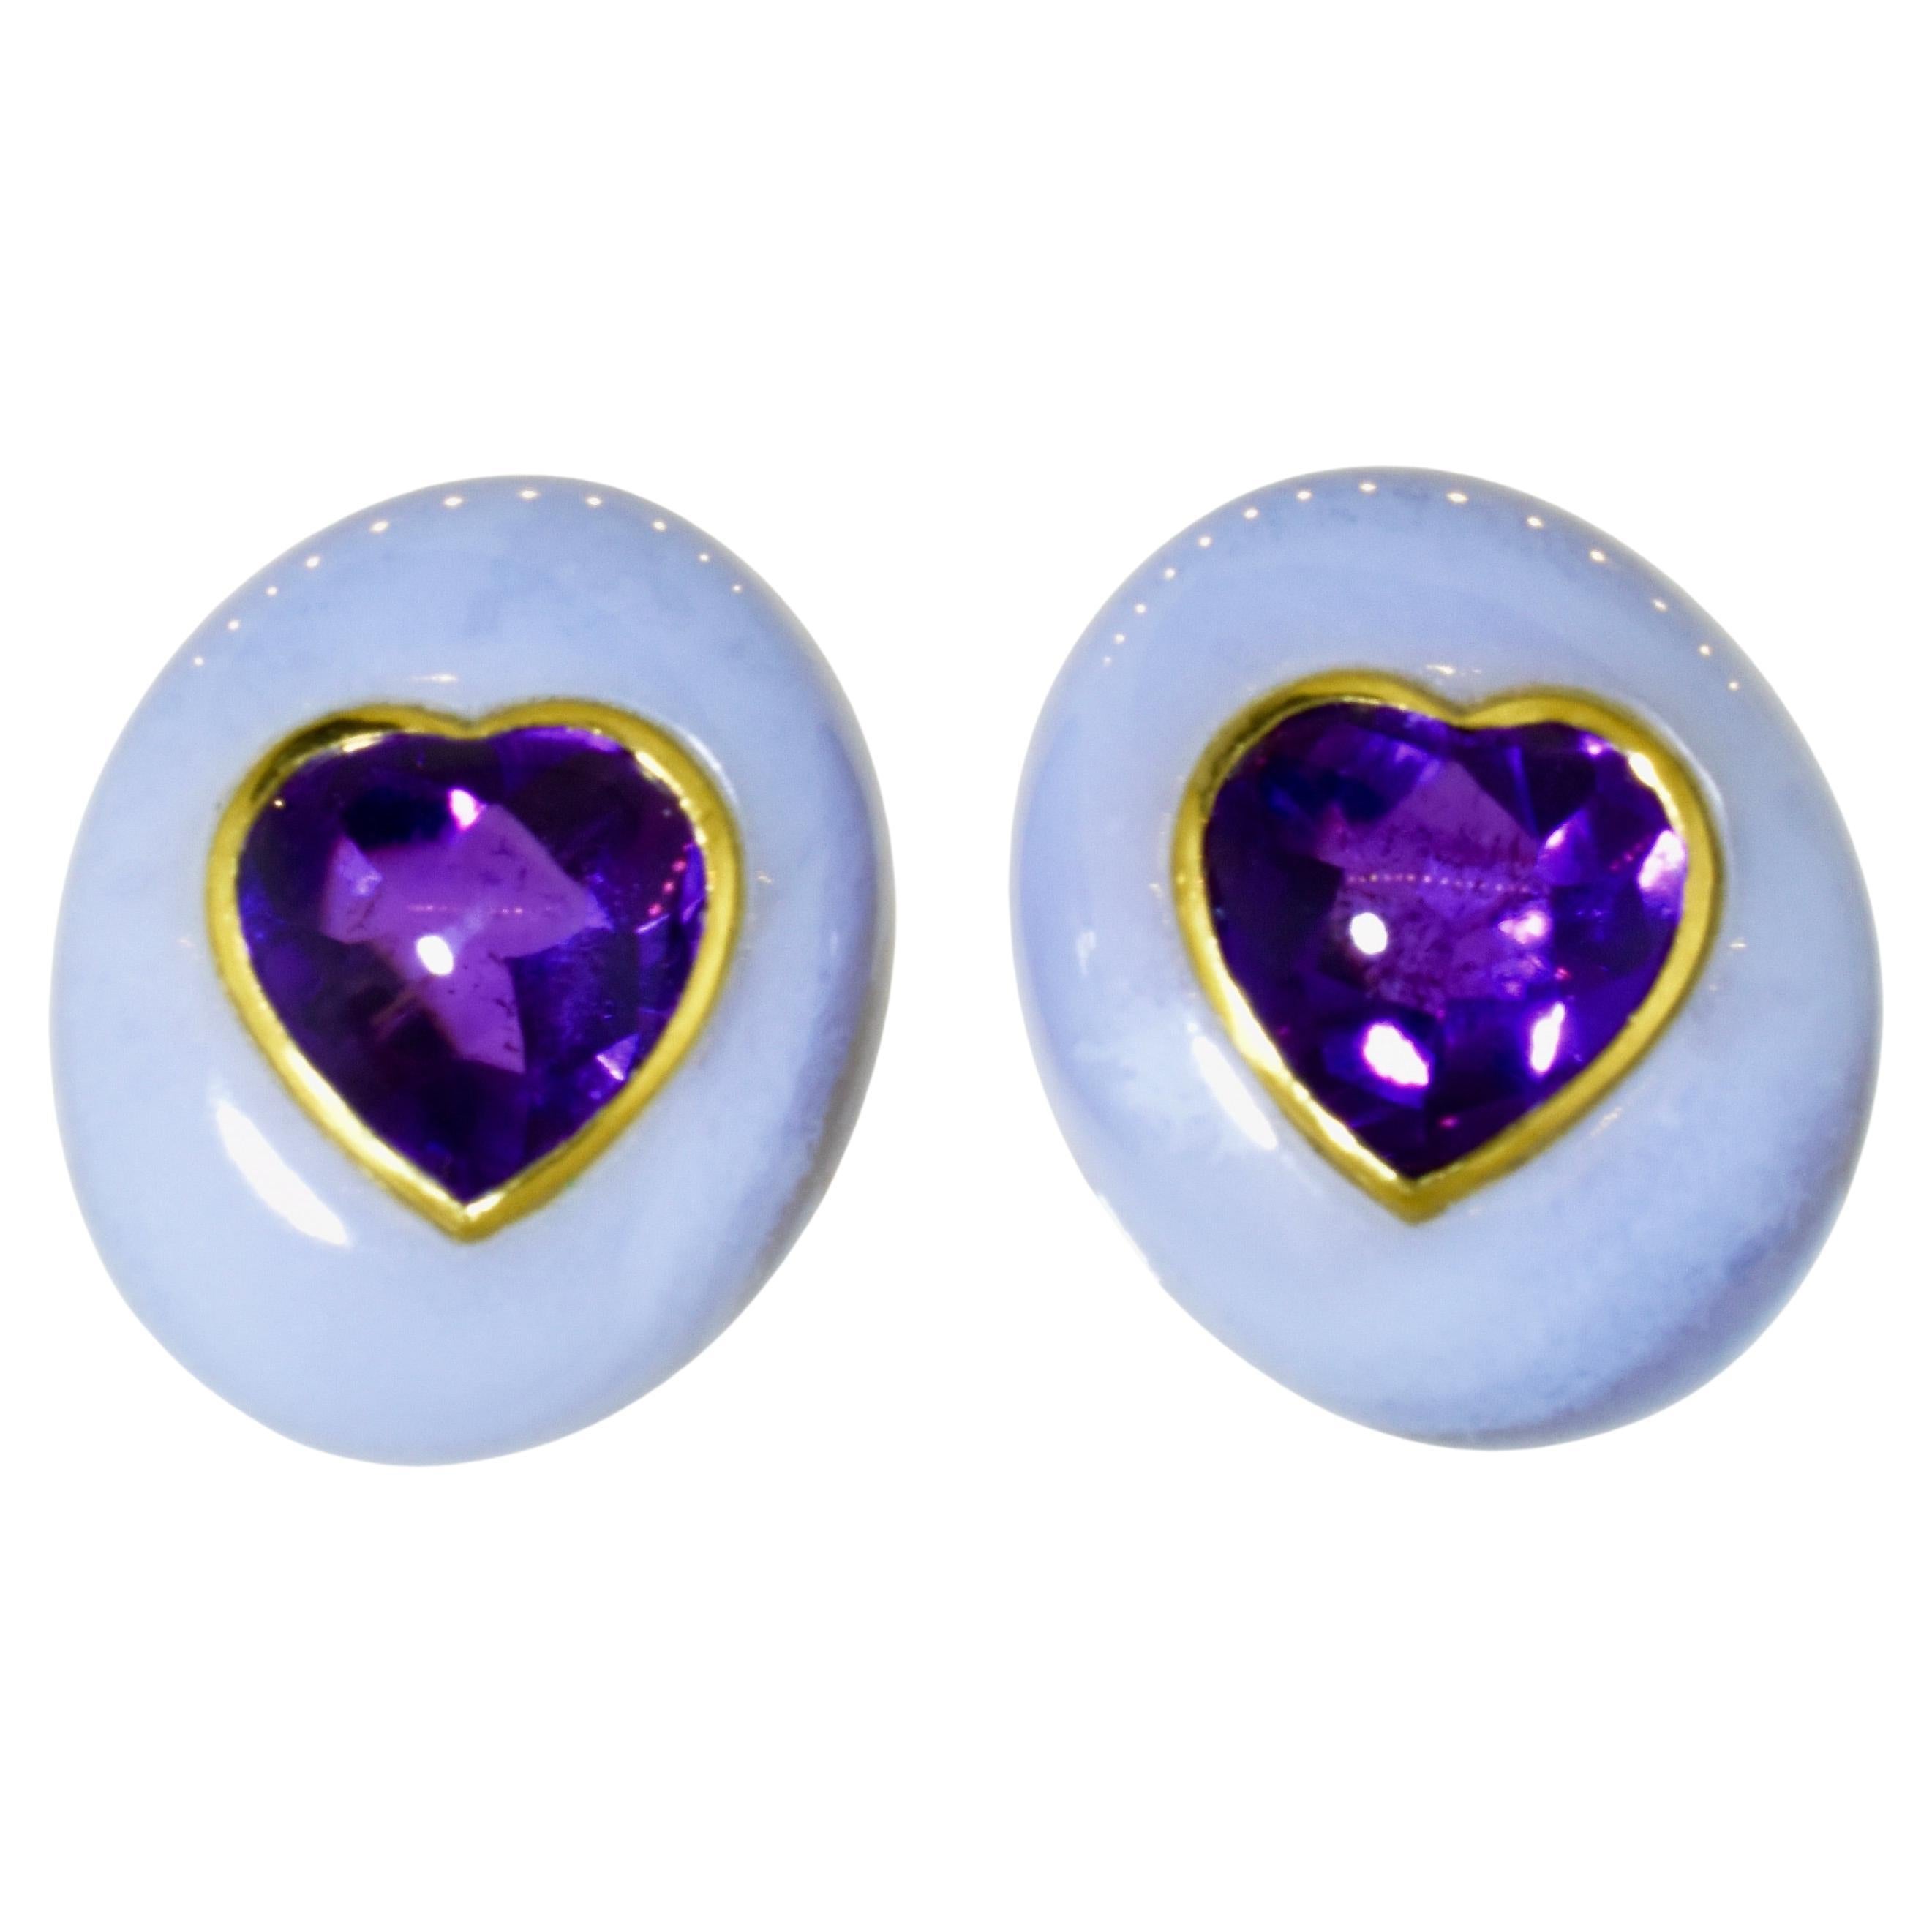 Angela Cummings 18K earrings.  These remarkable 18K yellow gold, amethyst and agate earrings are by Angela Cummings, they are slightly less than 1 inch in length and .75 inches in their width.  They are now for a non pierced ear and we can easily